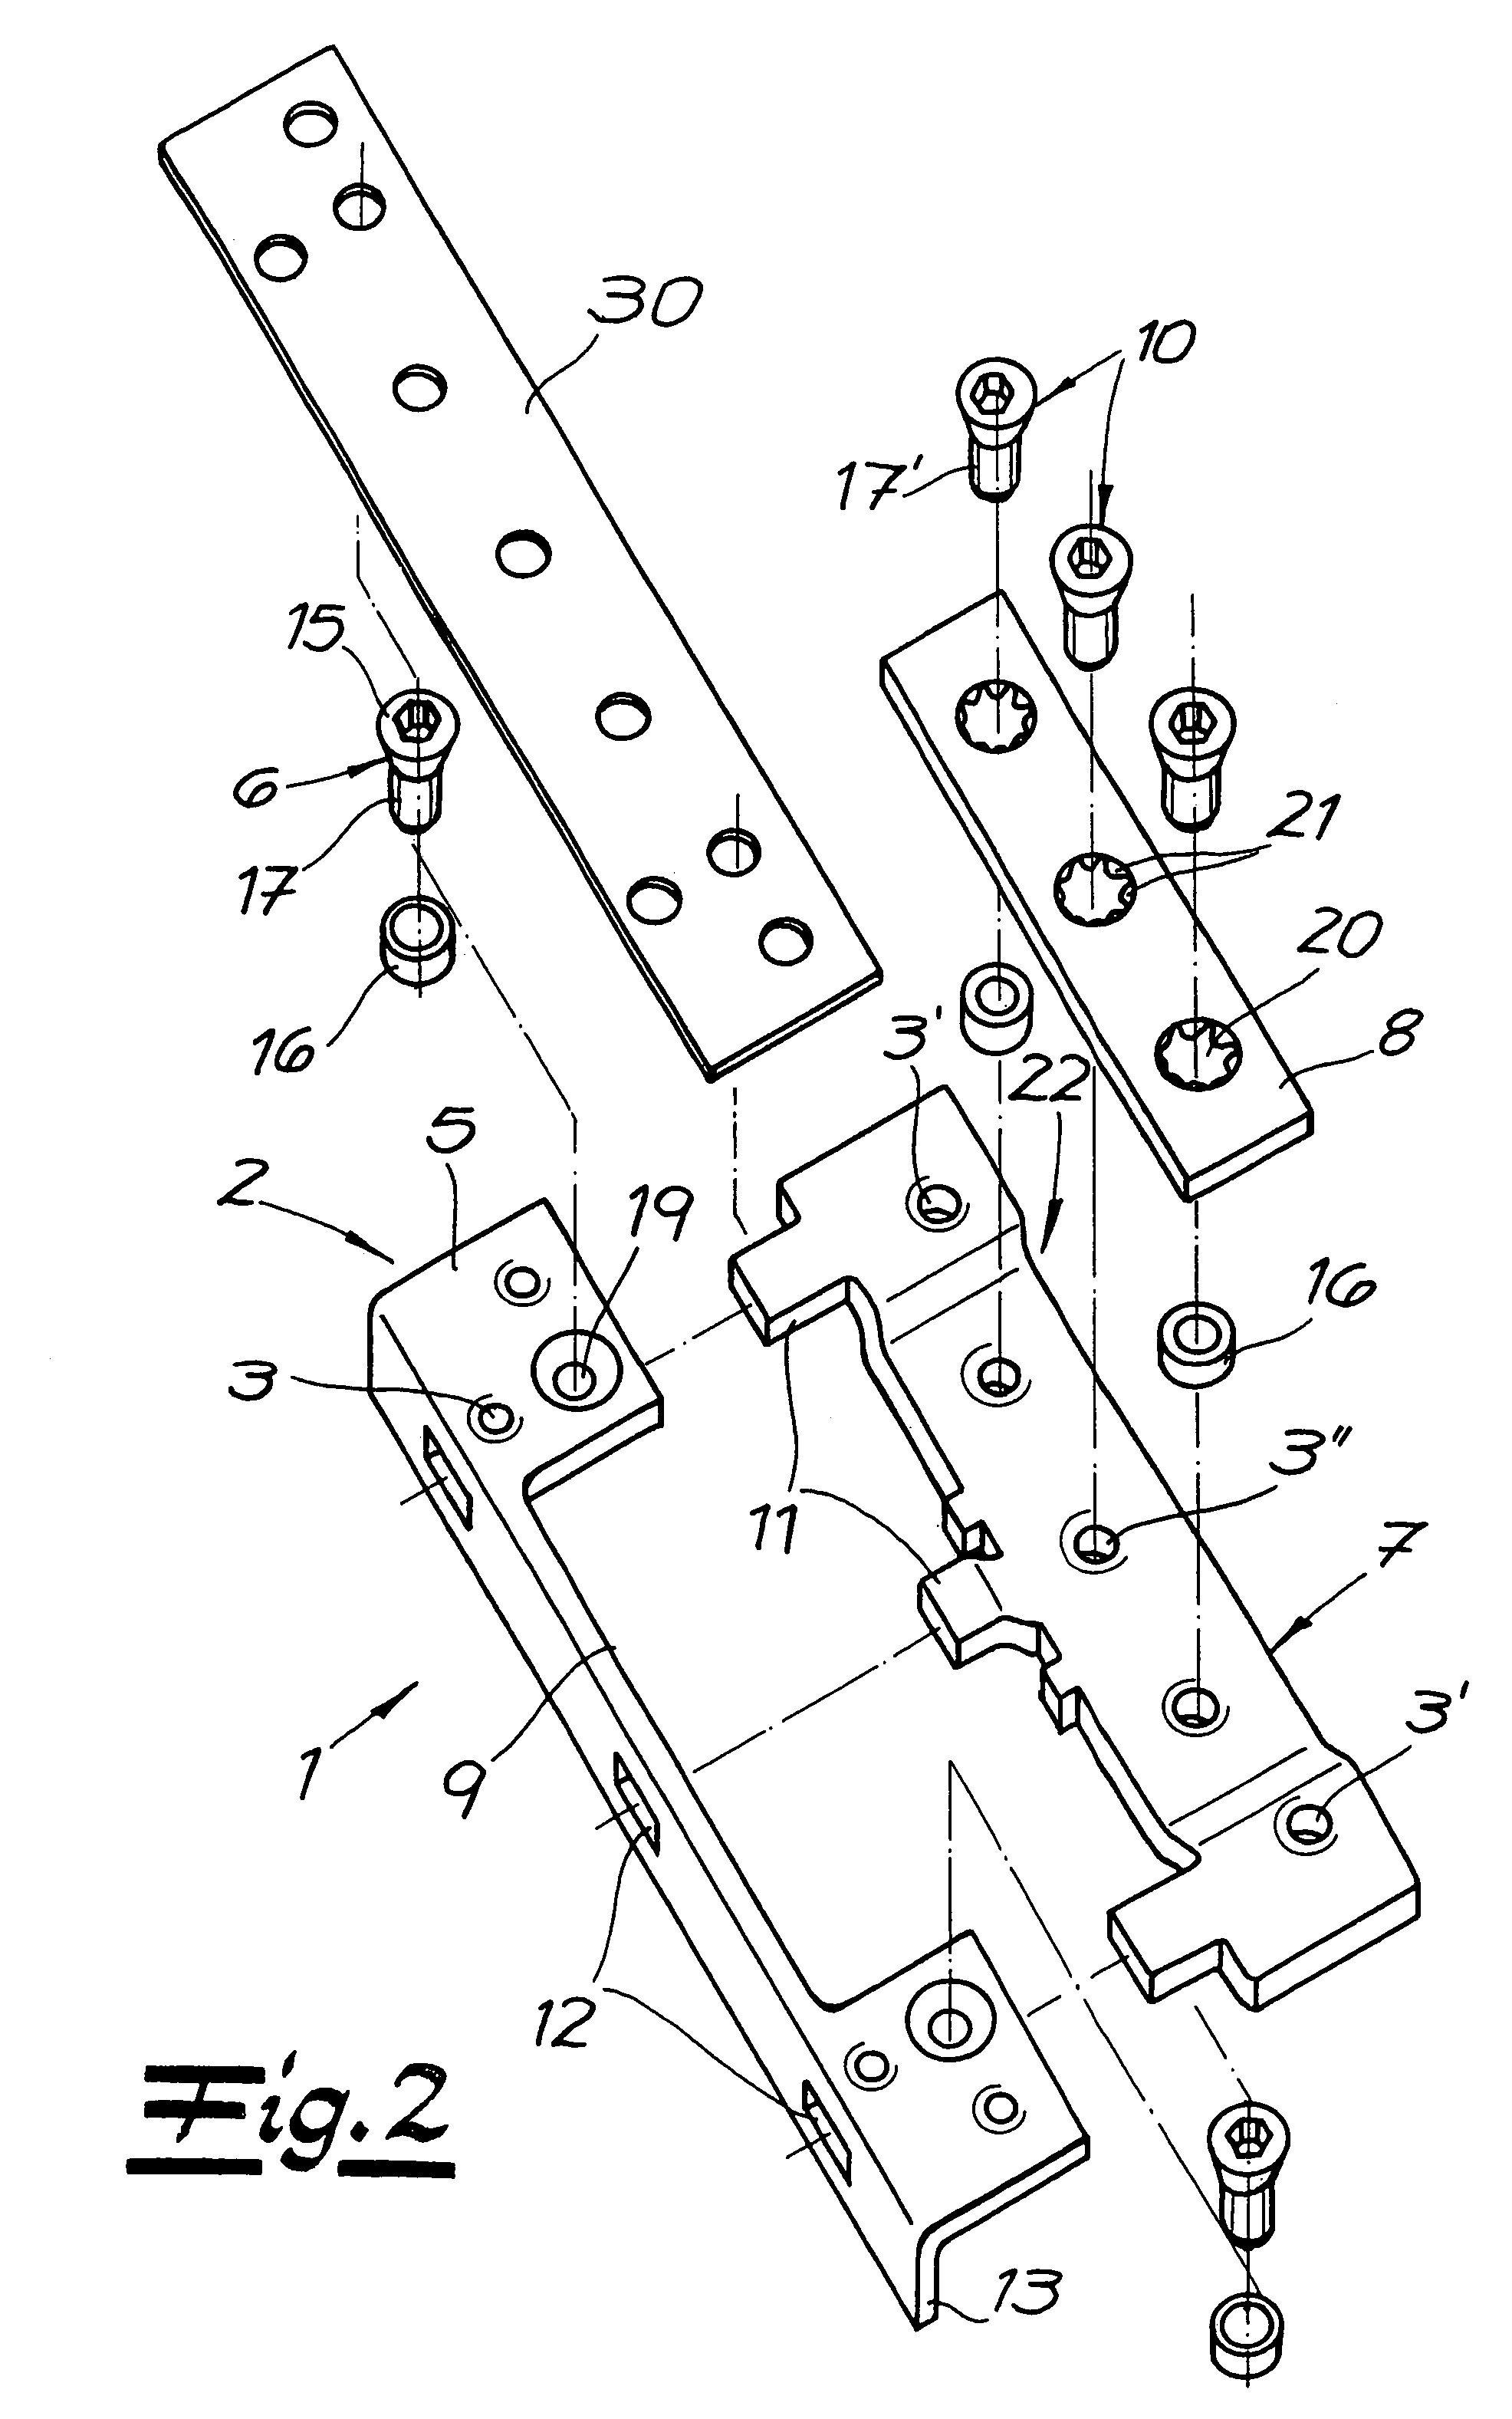 Hinge-plate accommodation element for attaching a hinge plate